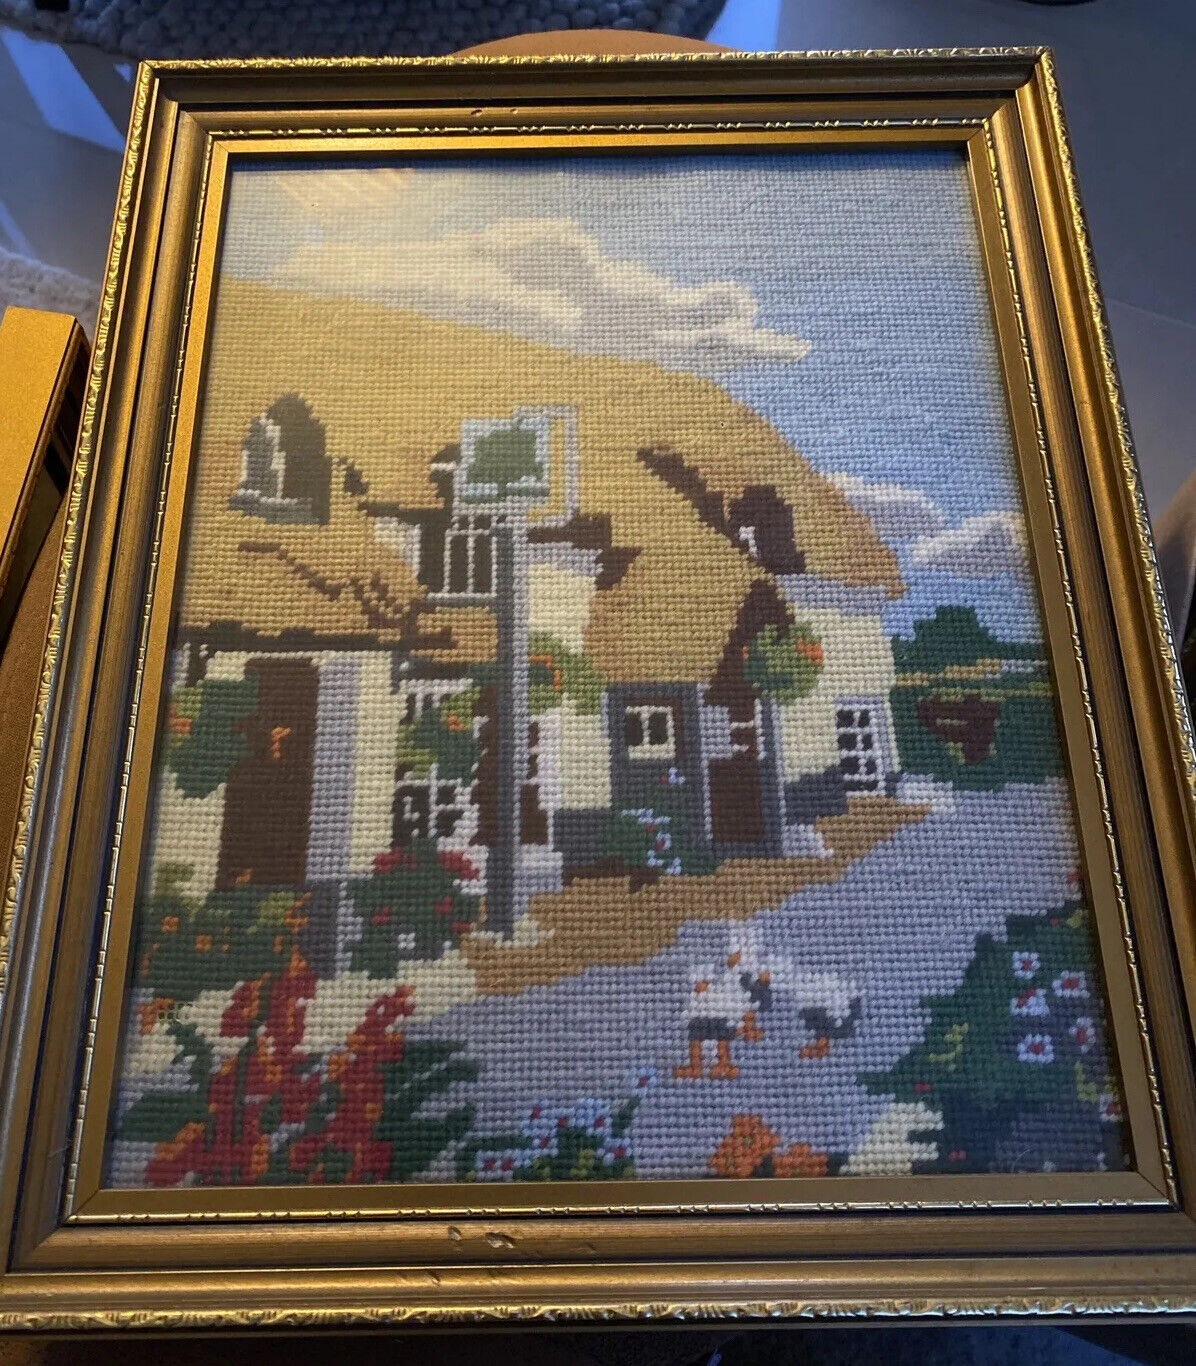 Thatched Cottage - Framed Tapestry, Needlepoint!